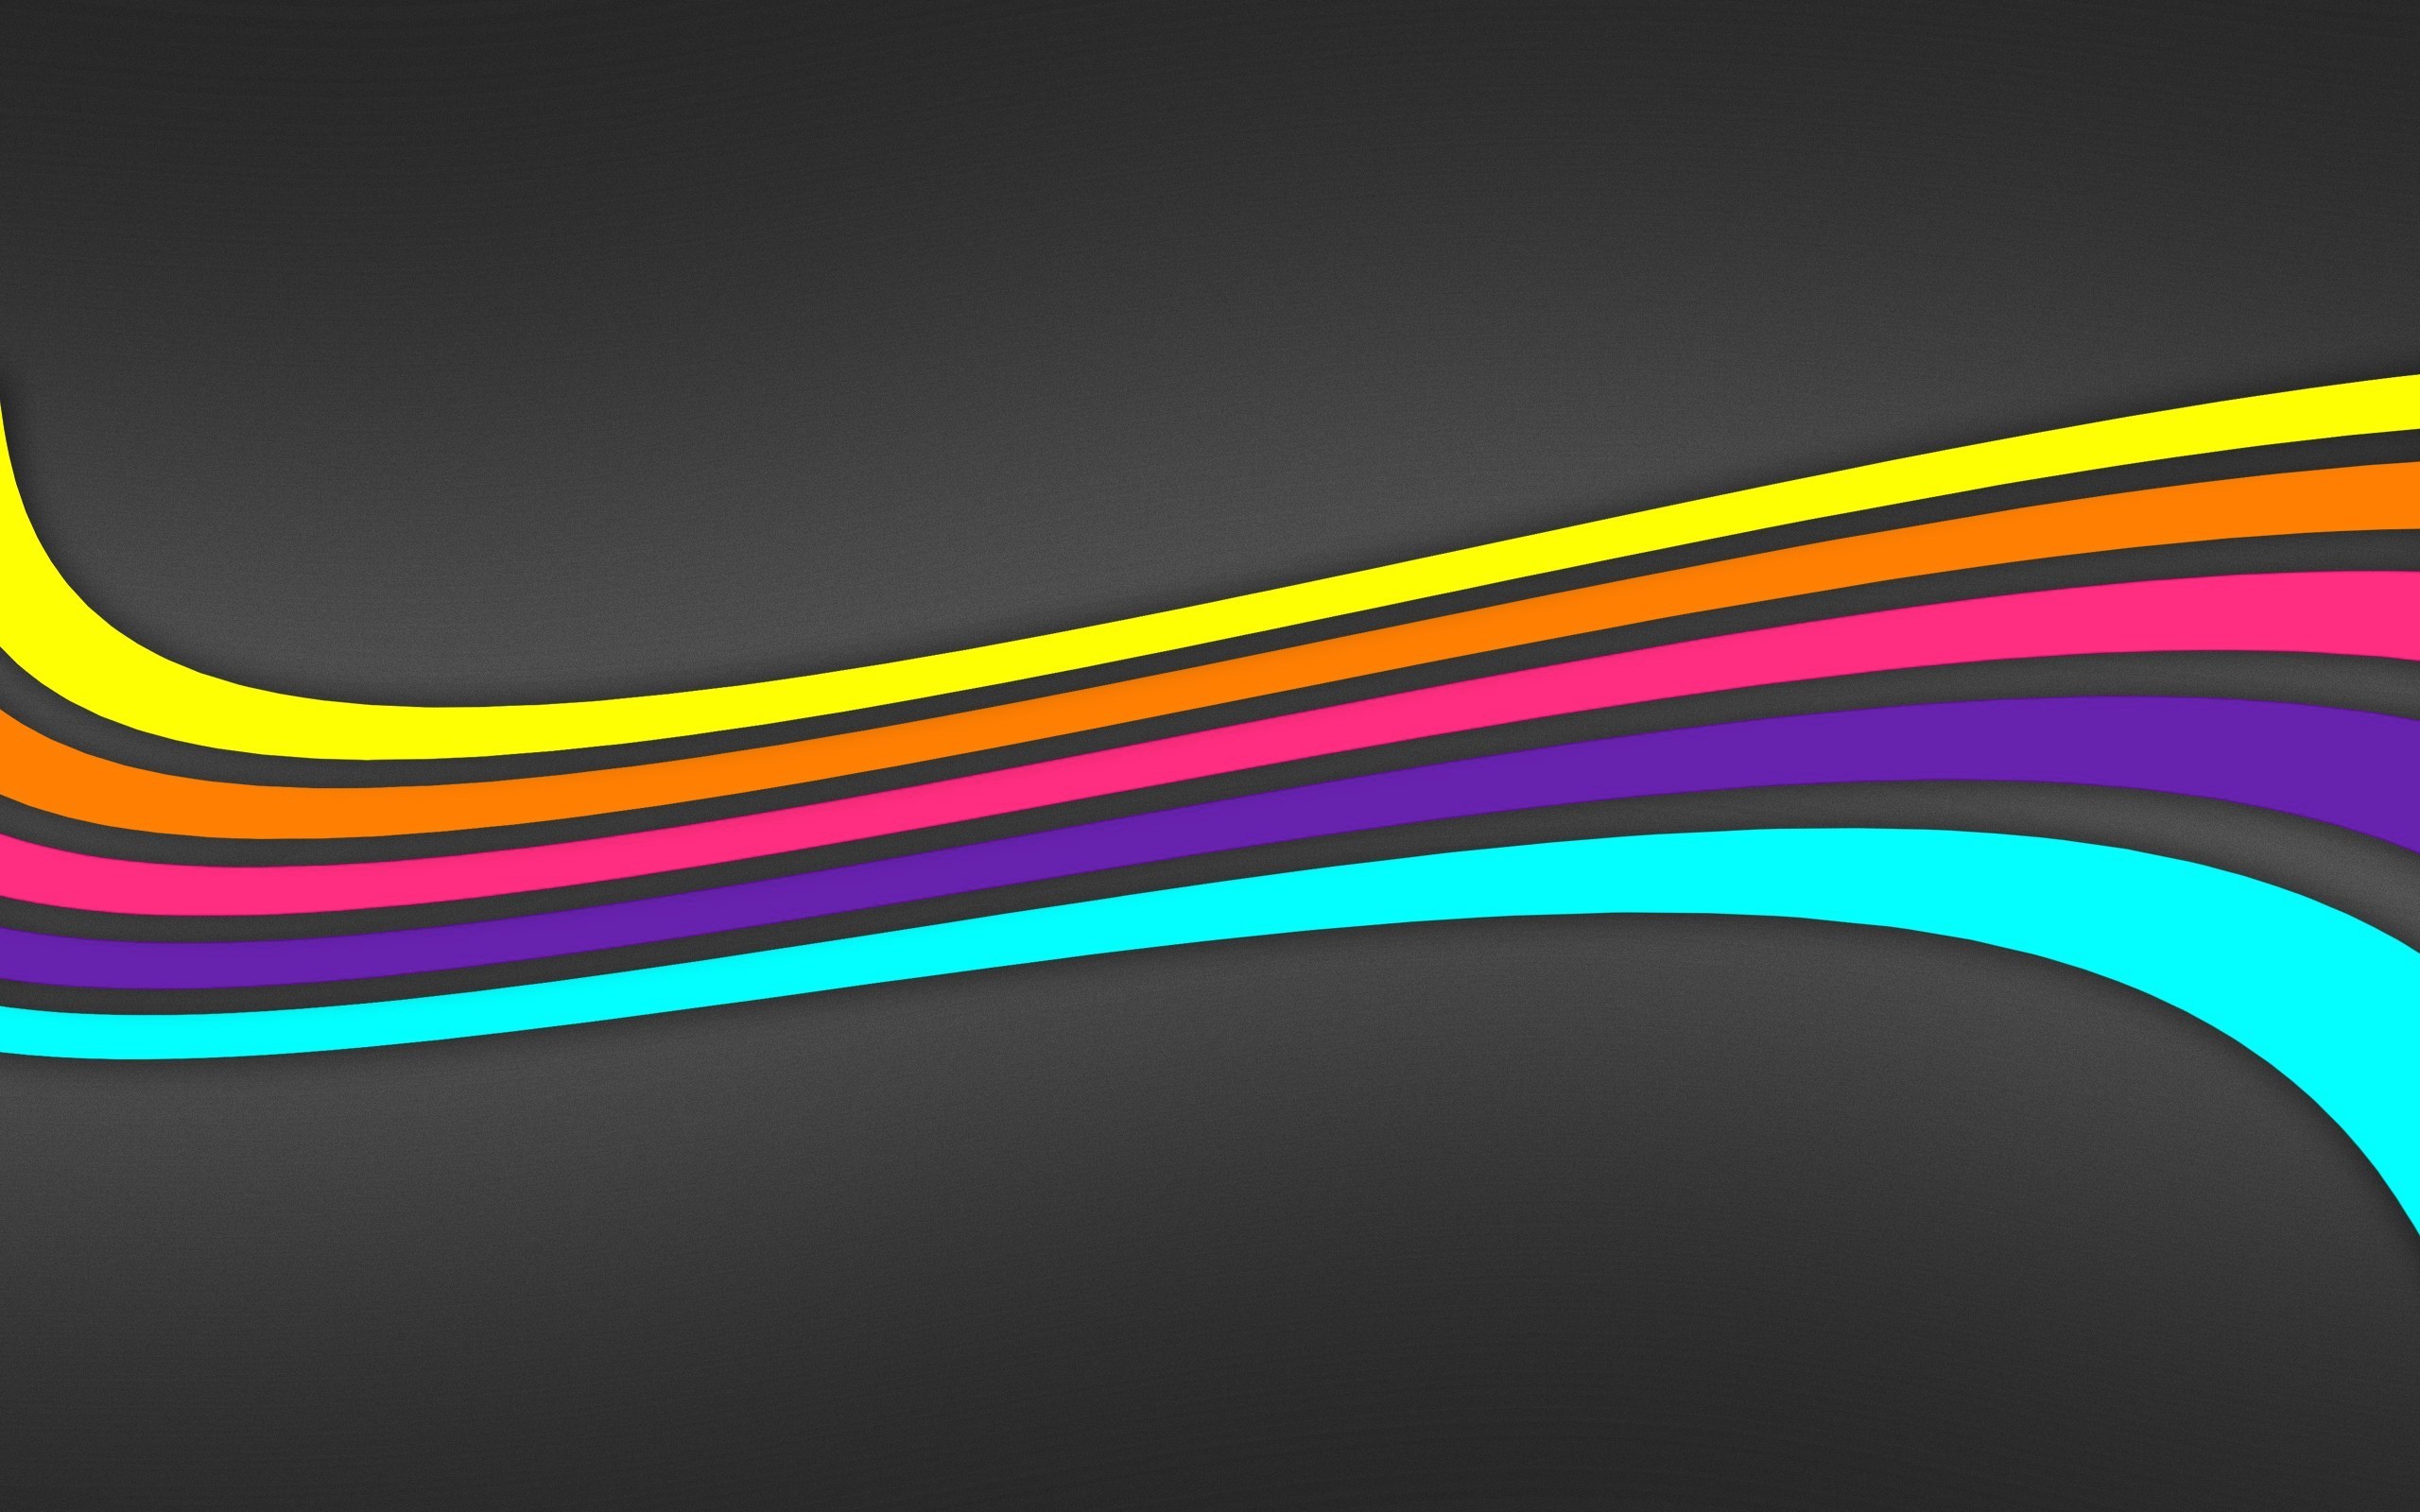 General 2560x1600 colorful simple background waveforms cyan